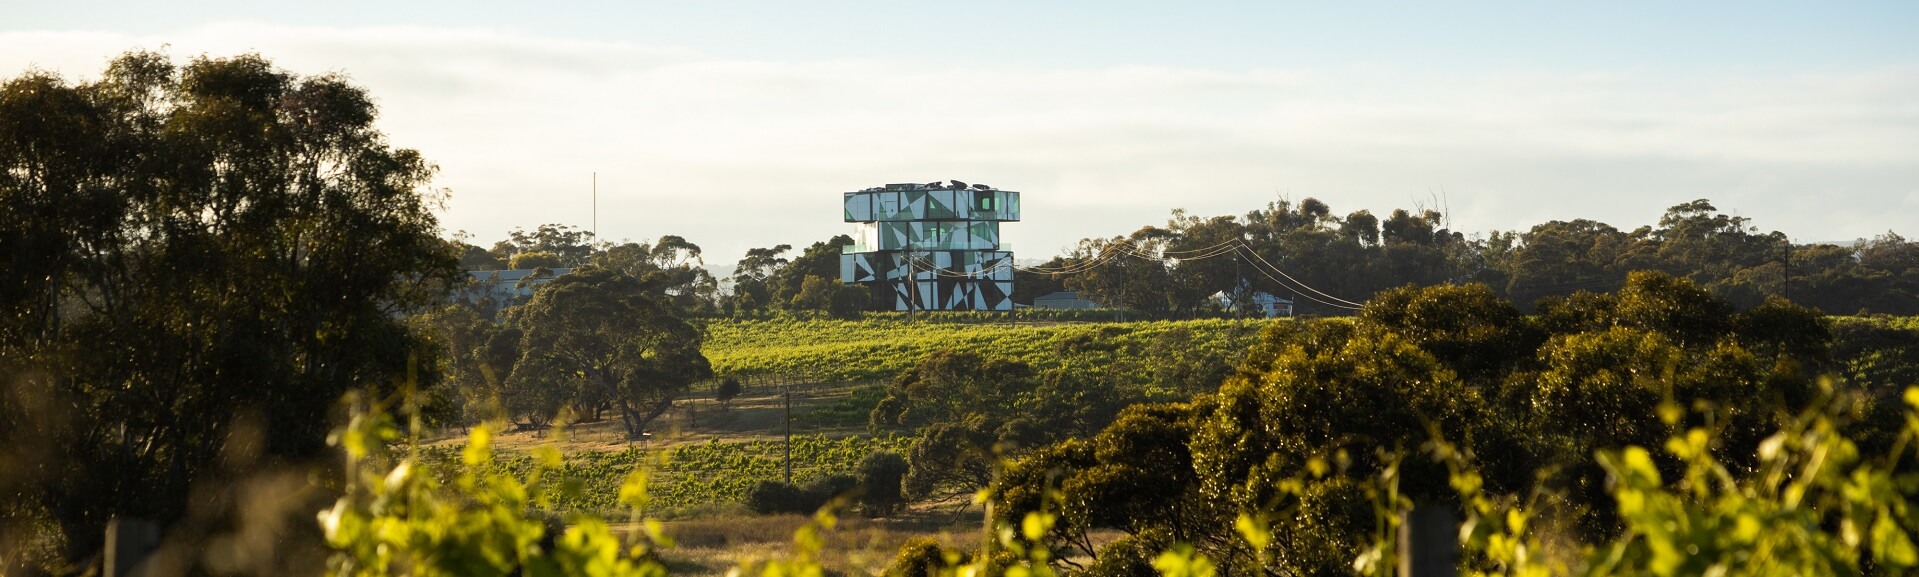 McLaren Vale & Cube Tour with Lunch